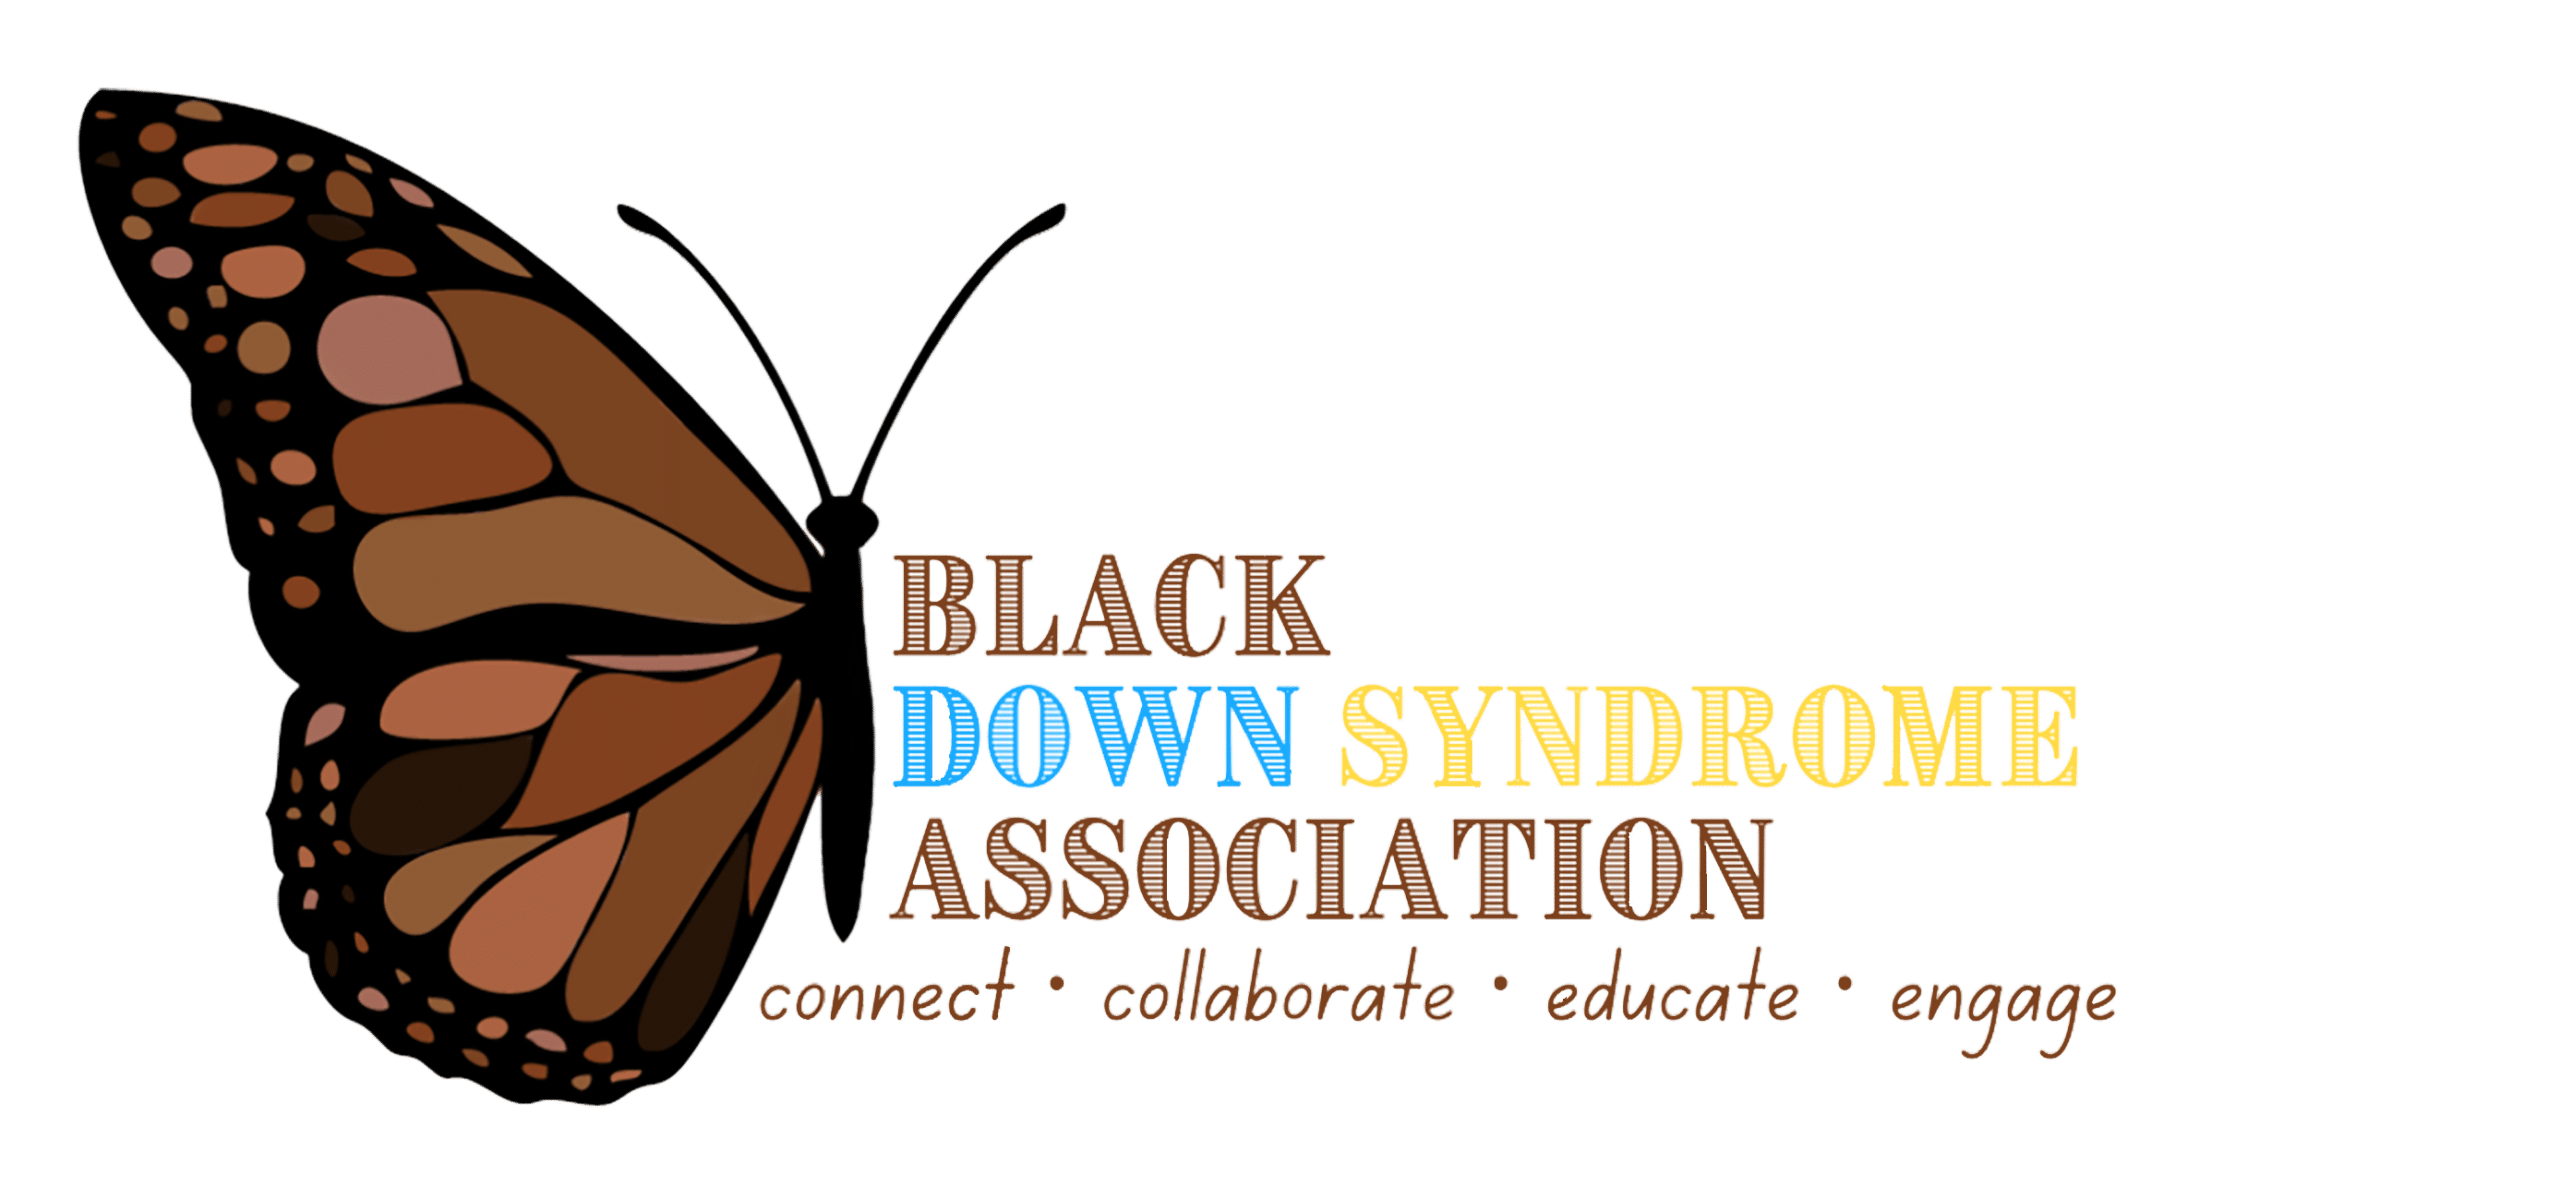 Meet the Black Down Syndrome Association